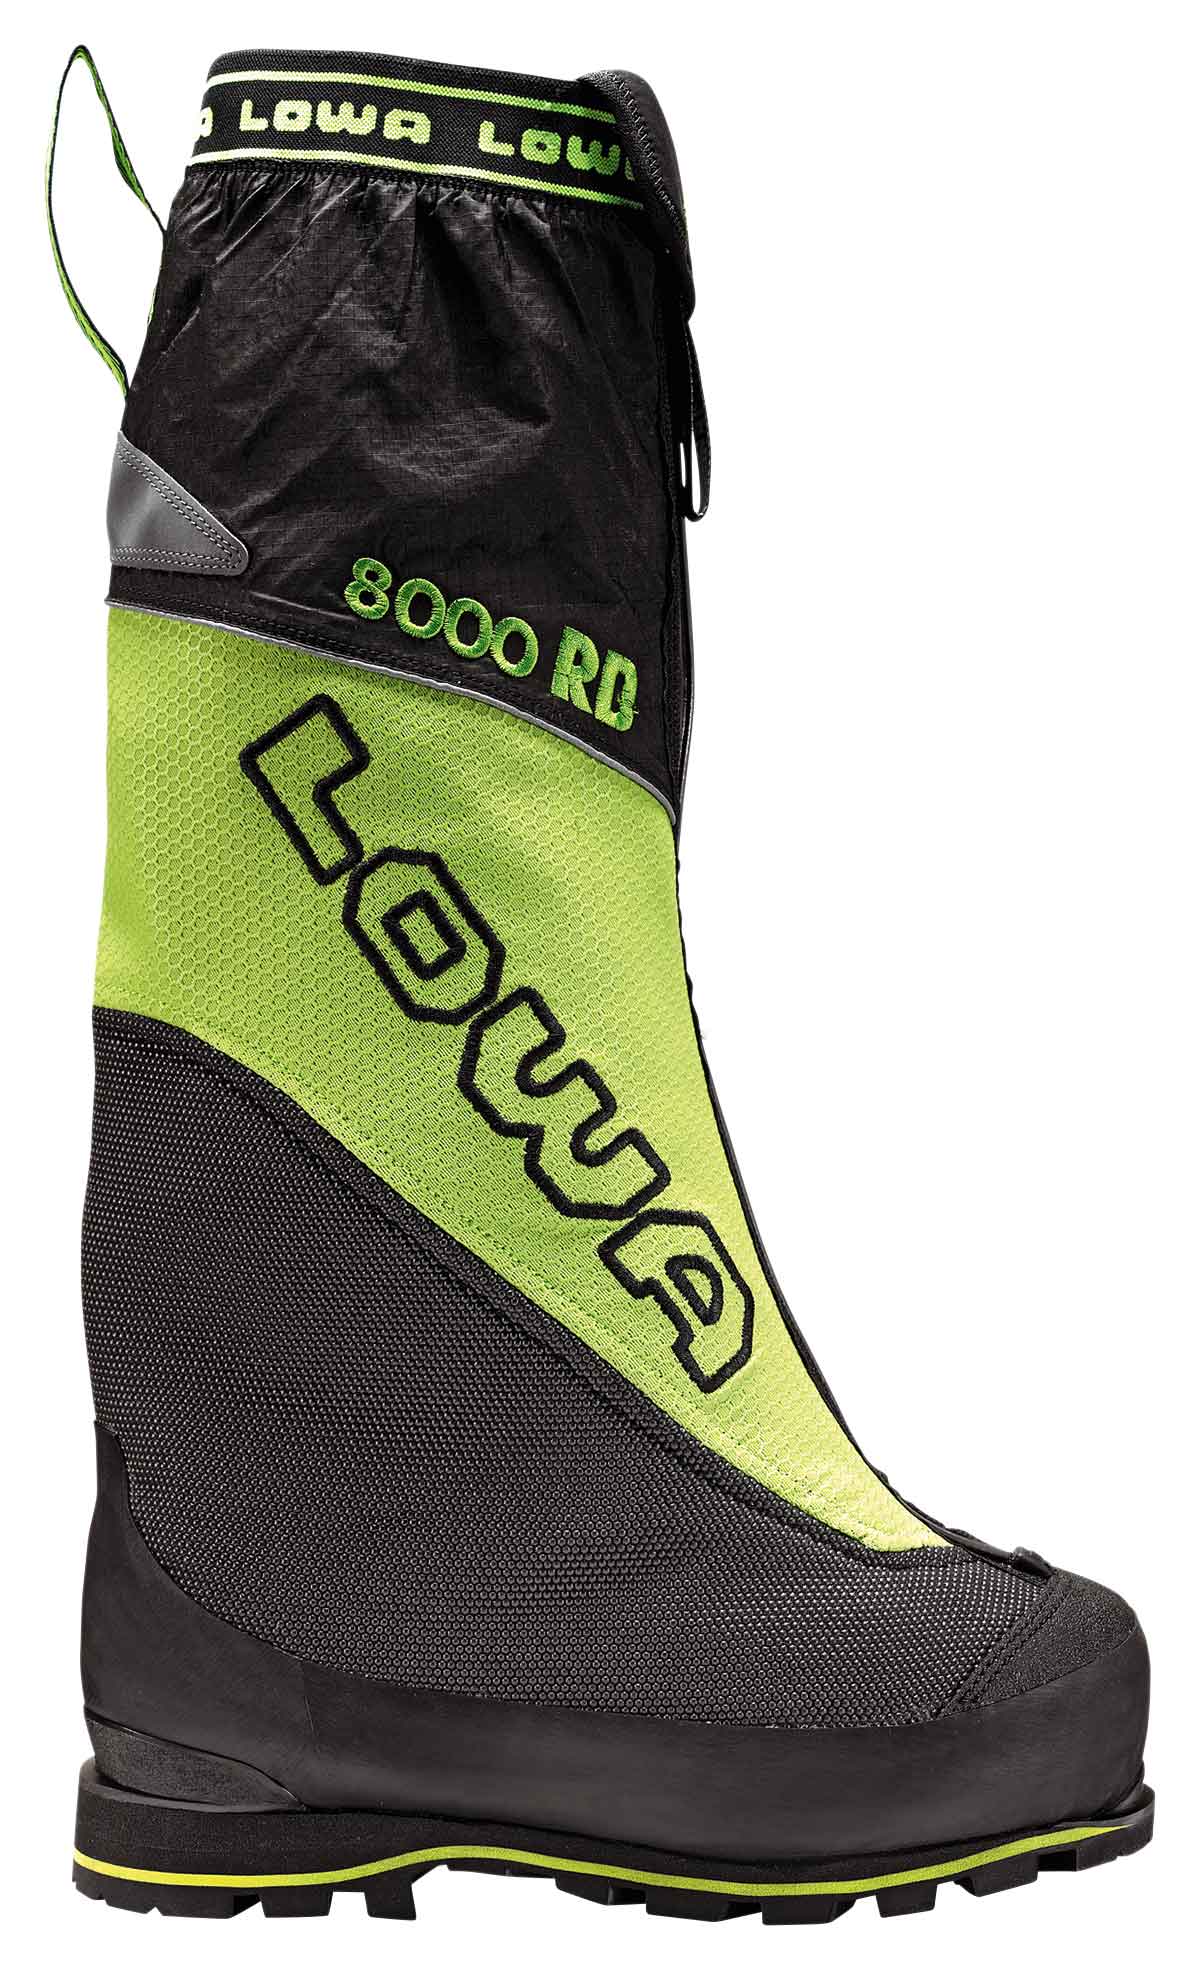 Lowa Expedition 8000 Evo RD - Chaussures alpinisme | Hardloop